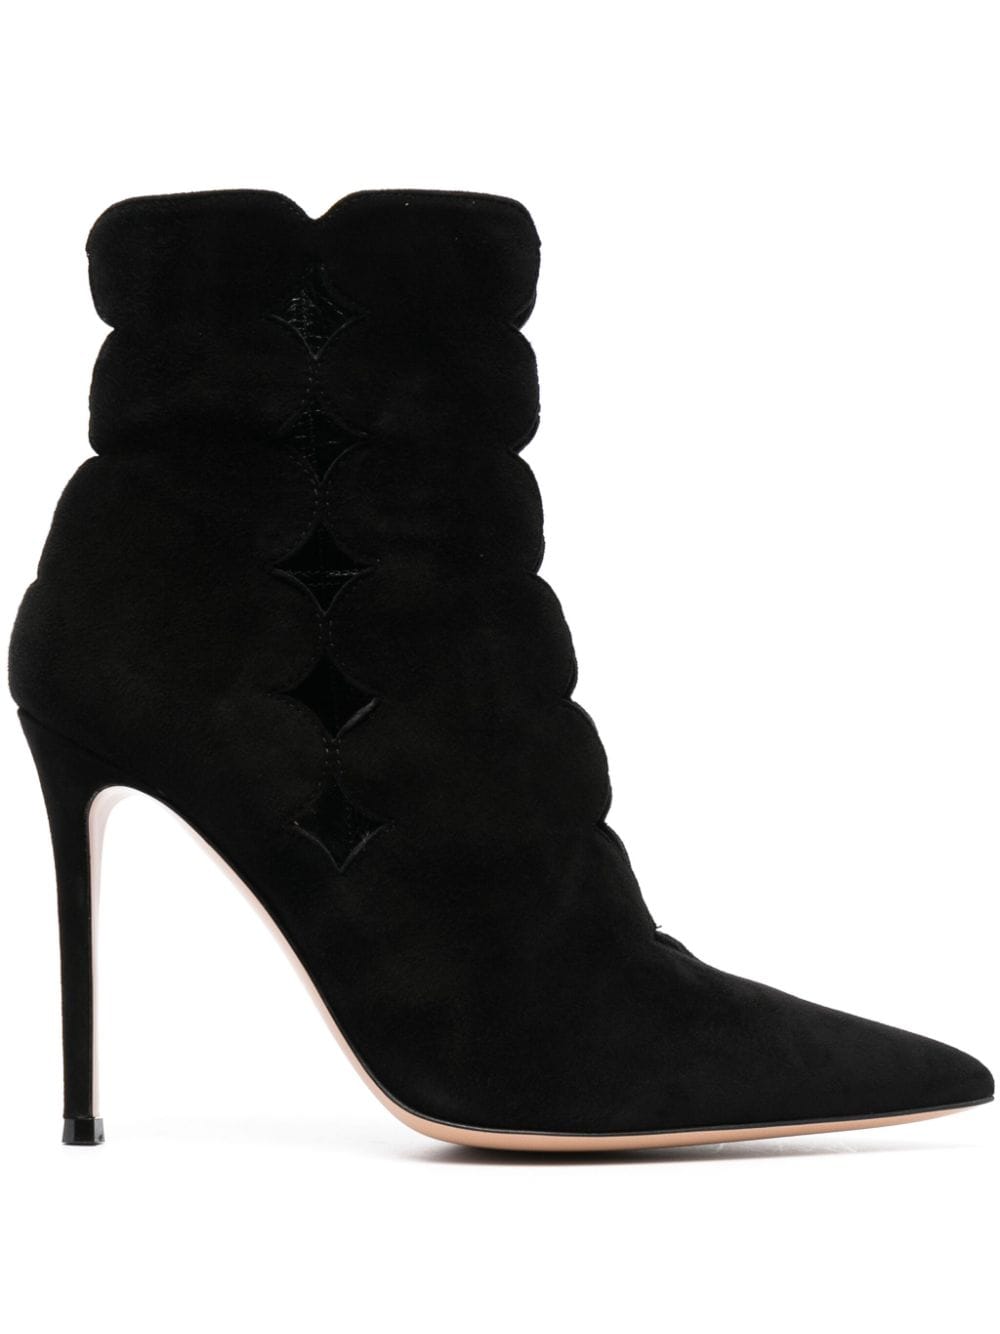 Gianvito Rossi Ariana 85mm cut-out Suede Boots - Farfetch